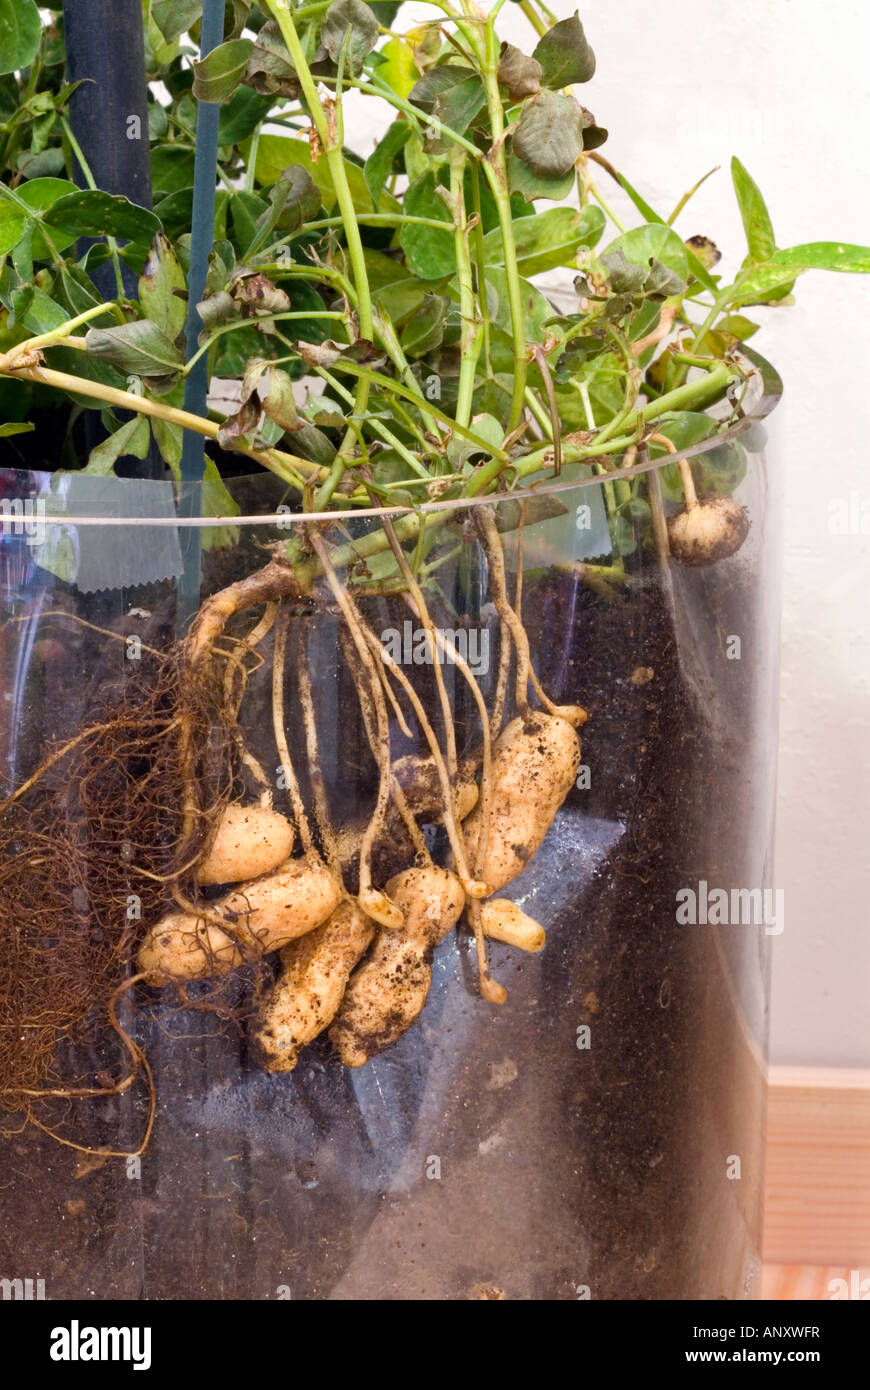 Peanuts in clear container showing roots & underground growth (Arachis hypogaea) educational demonstrations Stock Photo